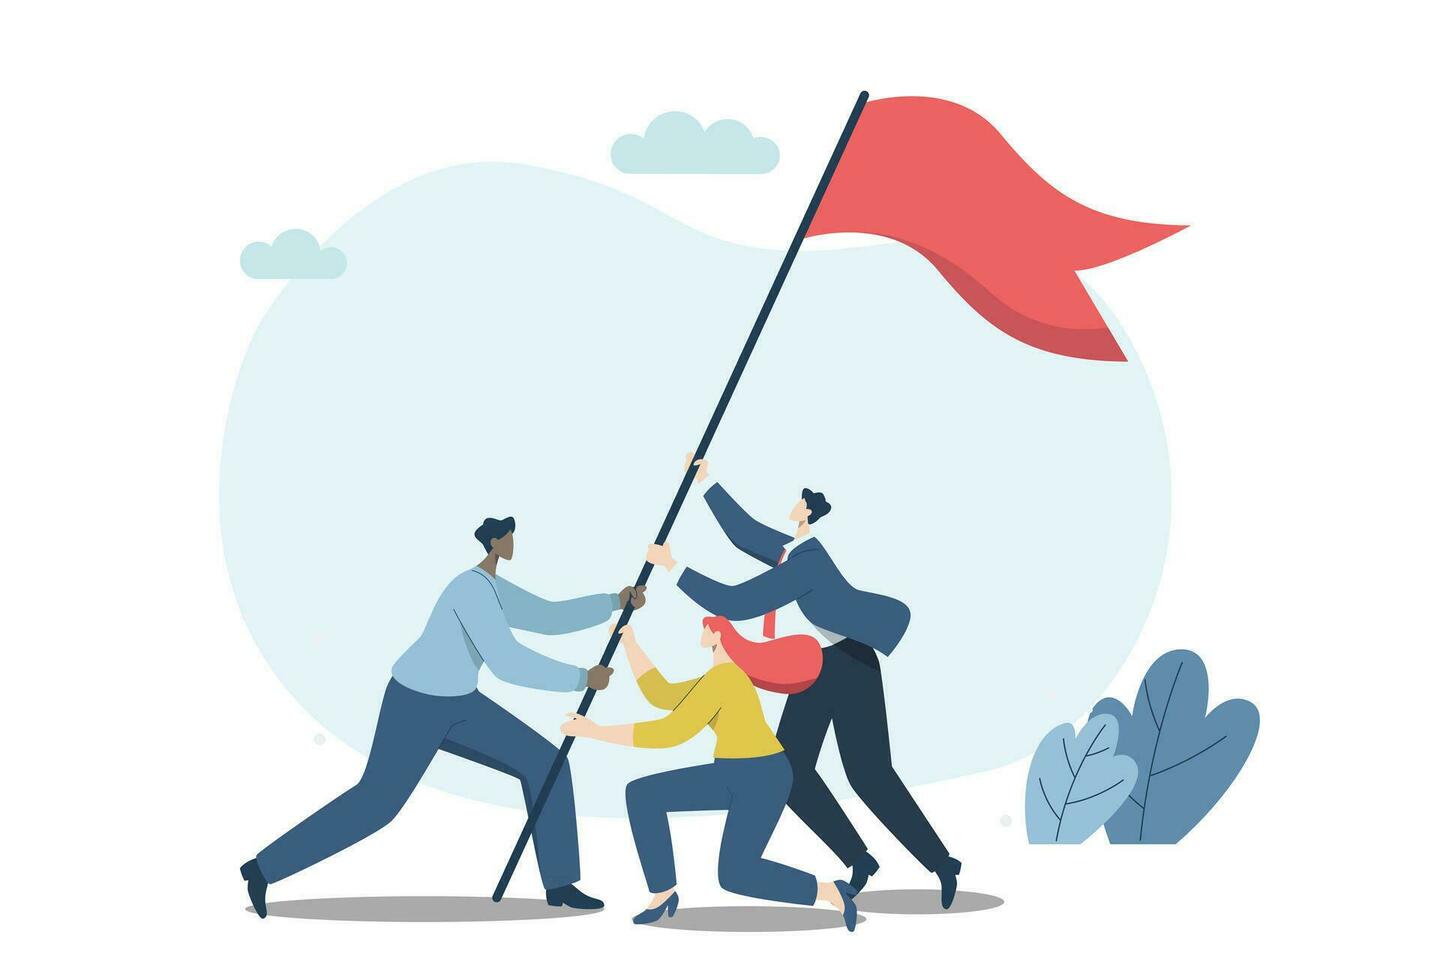 Strong teamwork leading to success for organizations, business people working as a team or partners helping to raise the flag of victory. Vector design illustration.